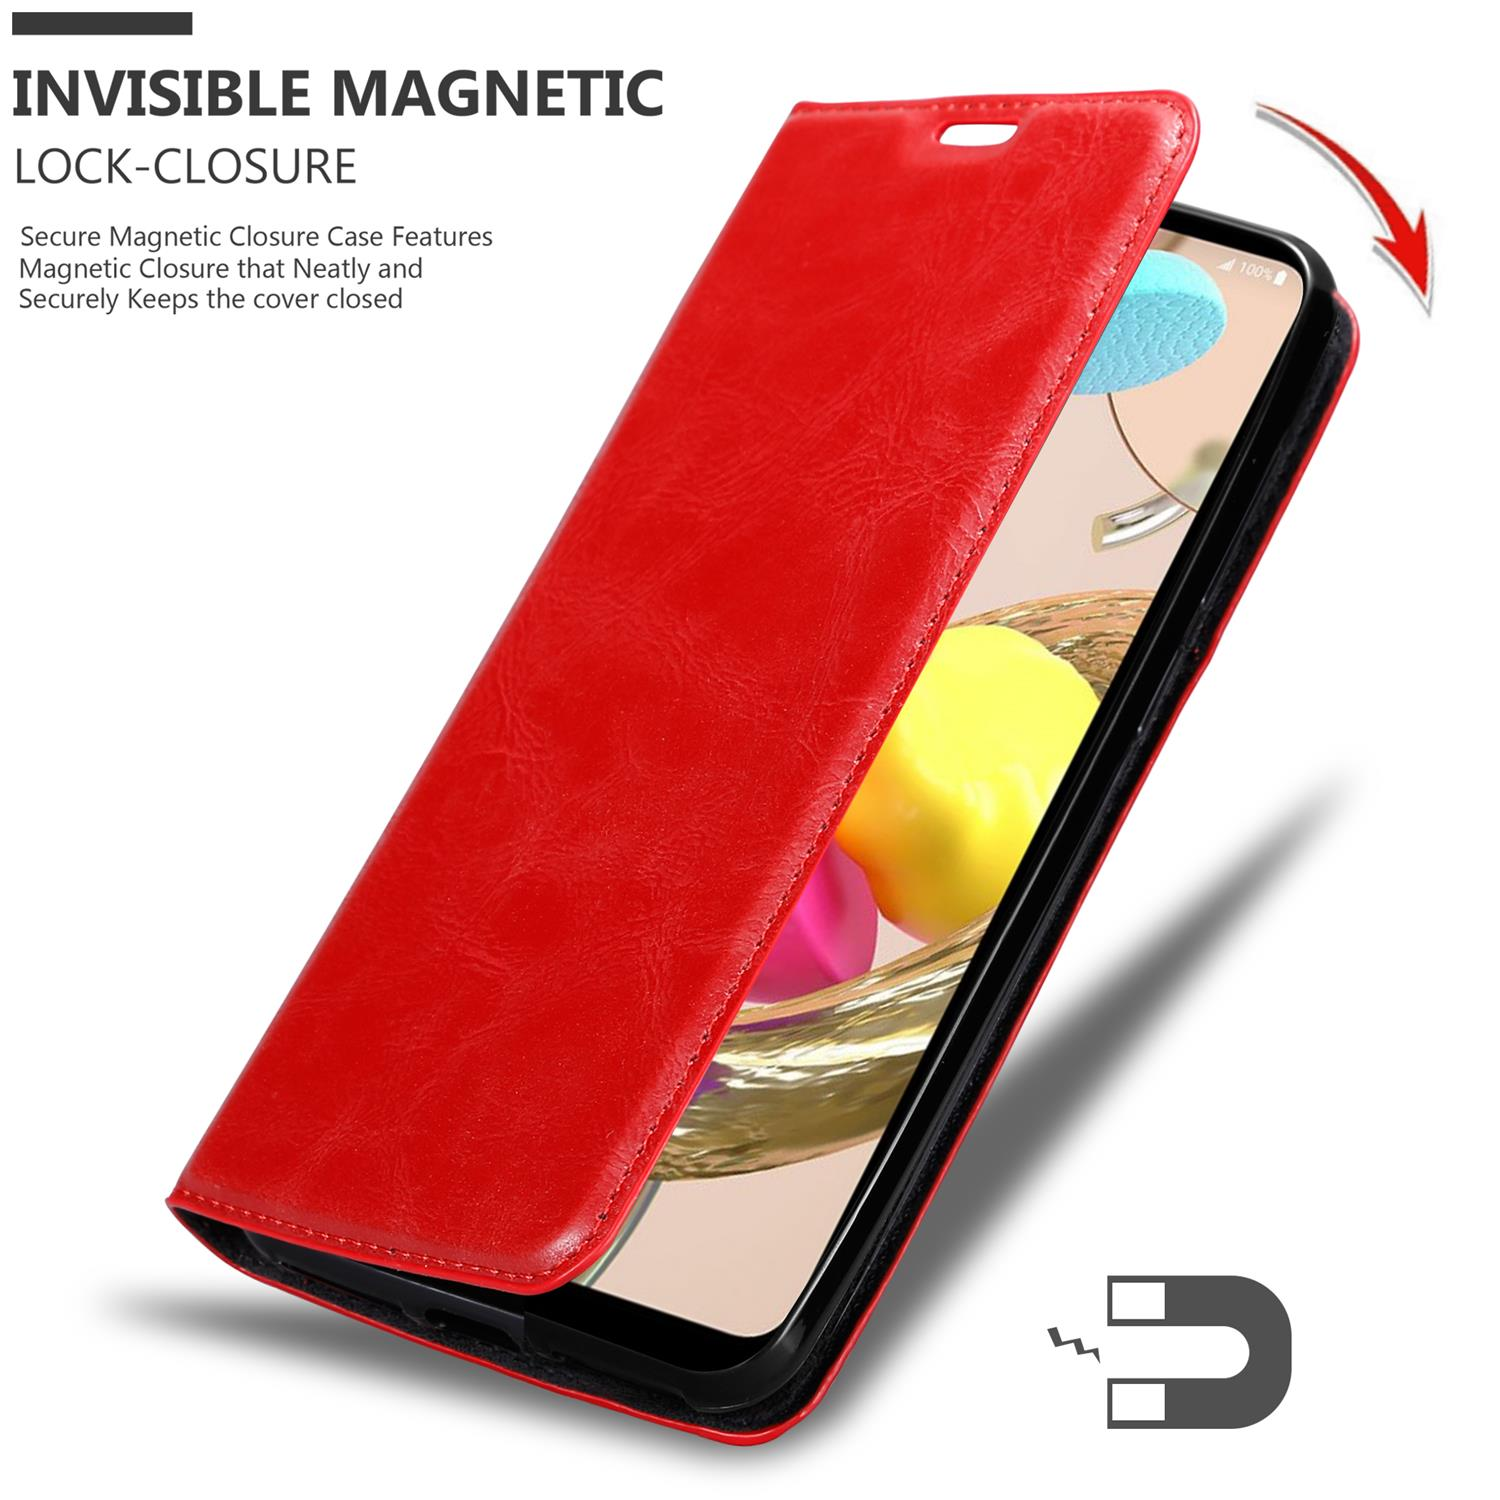 Hülle APFEL Magnet, Invisible LG, Book CADORABO K42, ROT Bookcover,